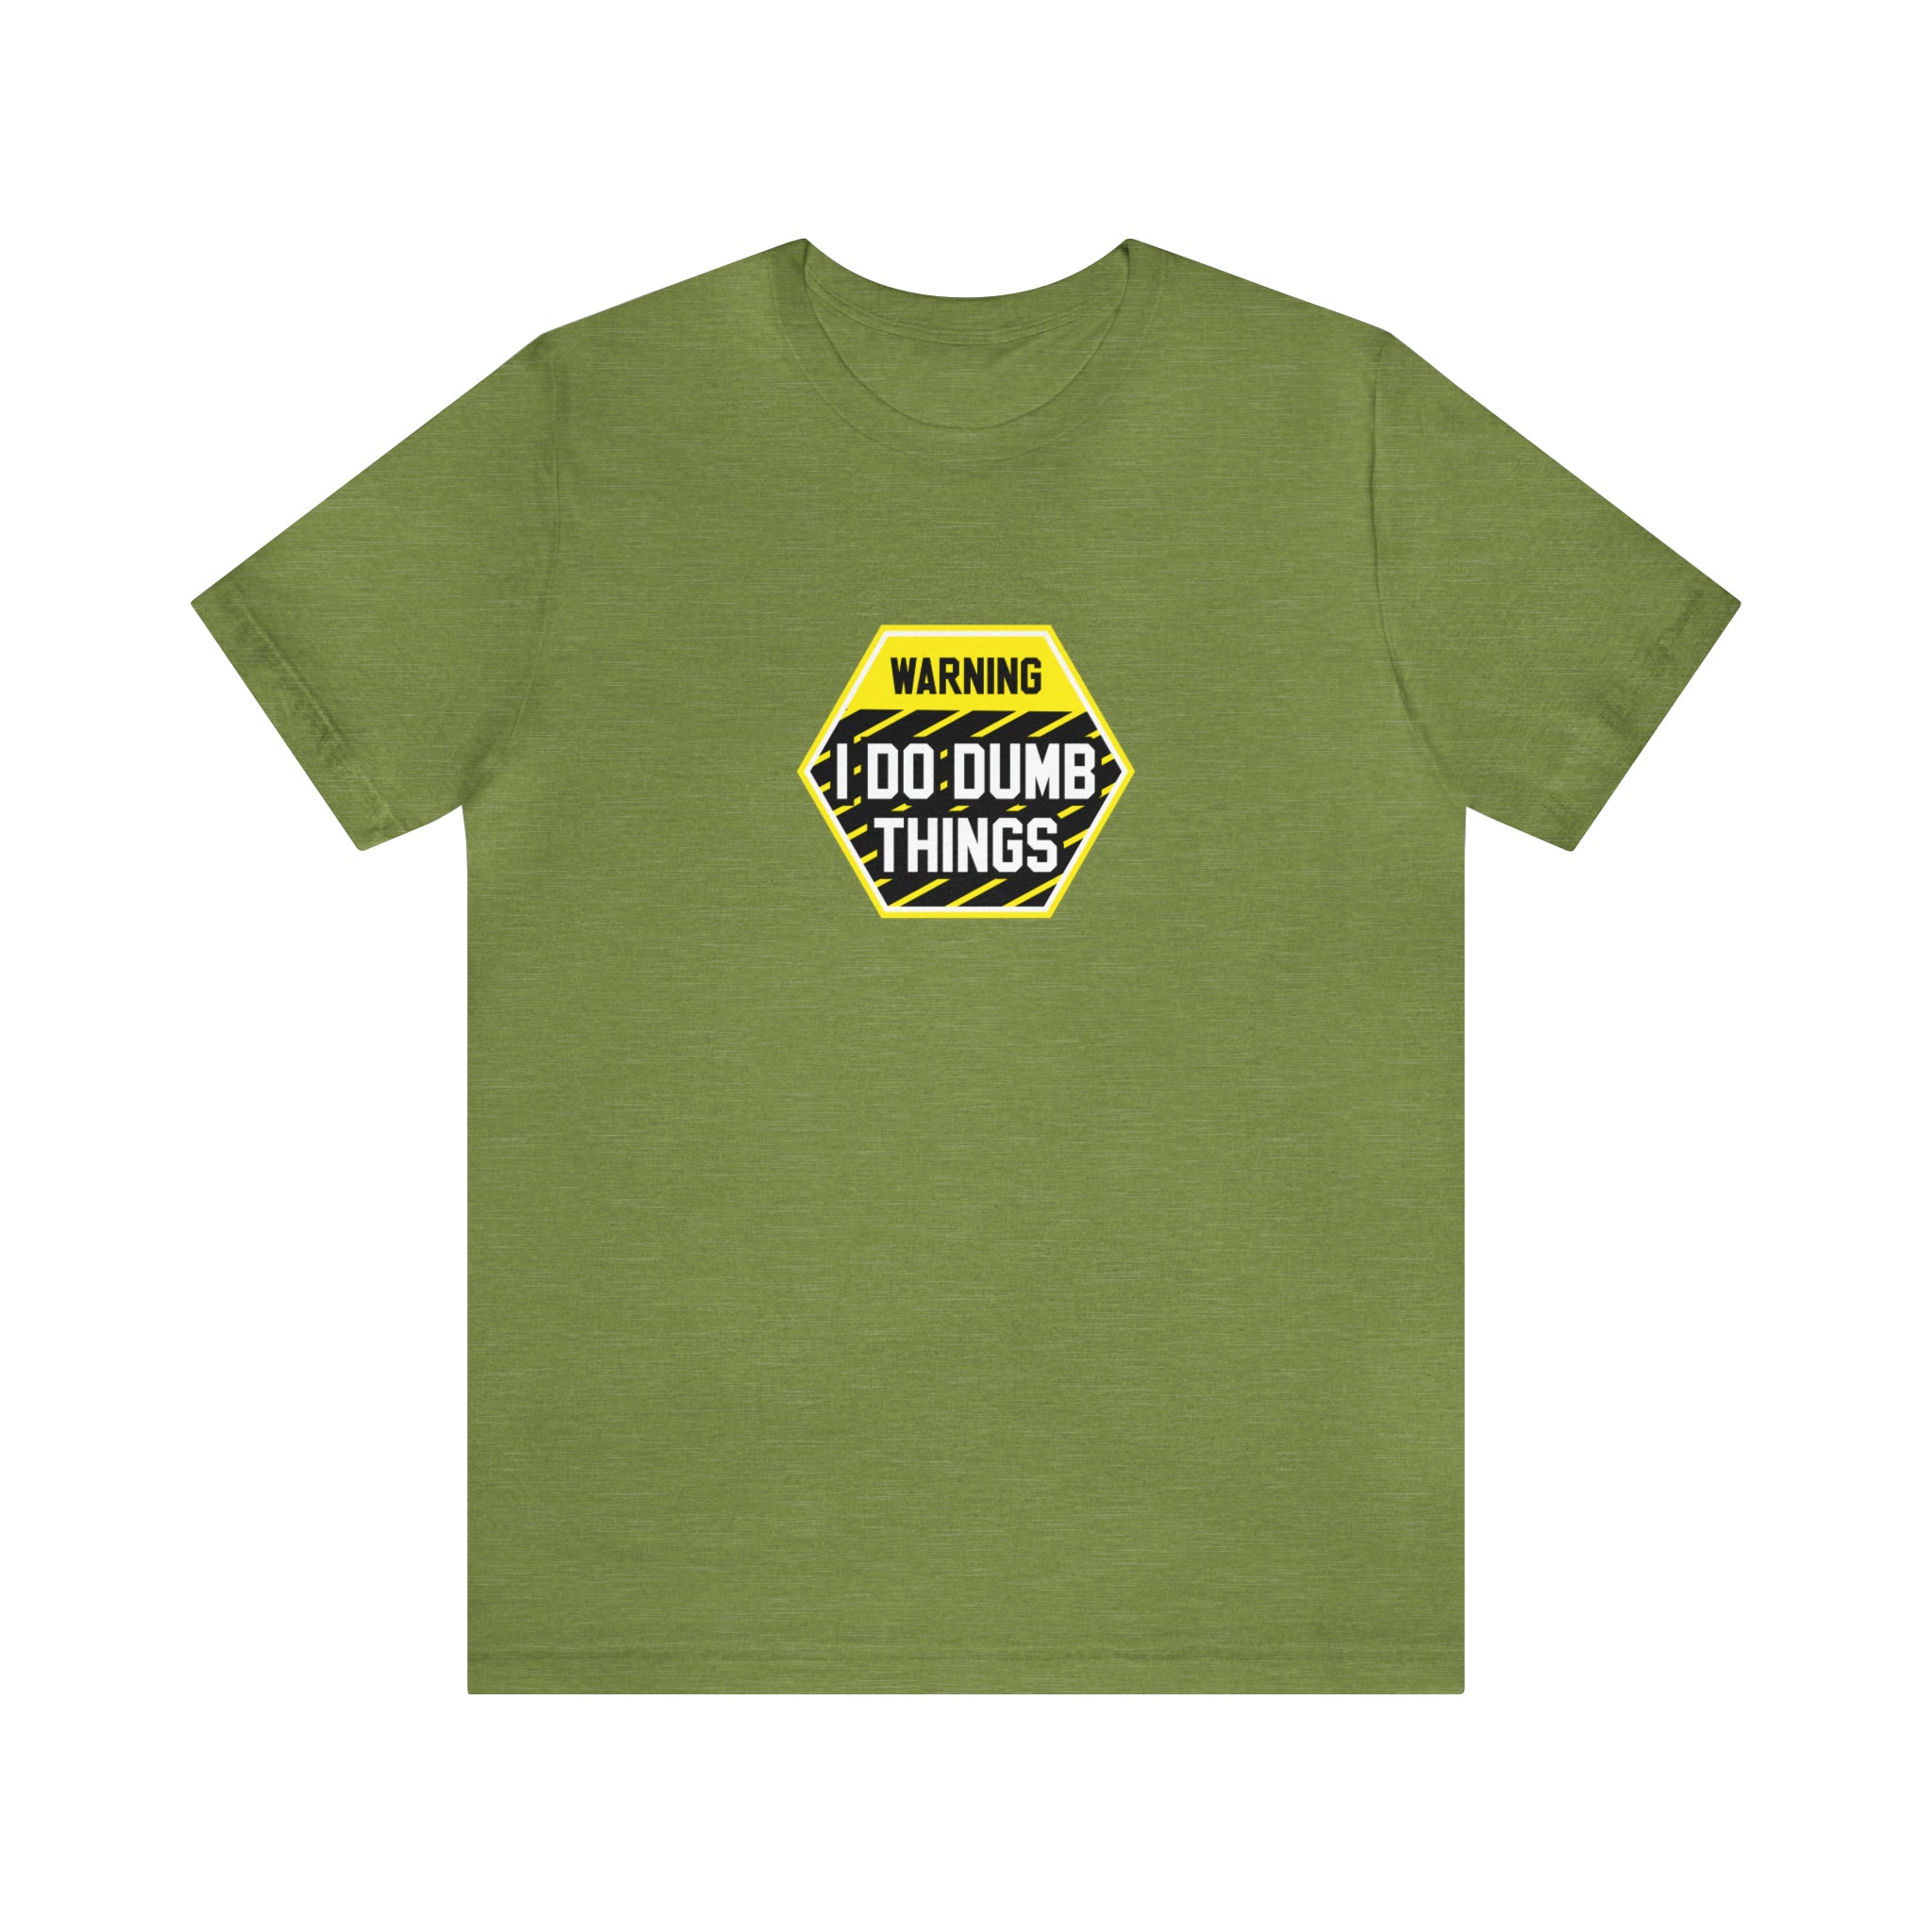 A green Warning - I do dumb things T-Shirt that says don't do drugs, made by Printify.